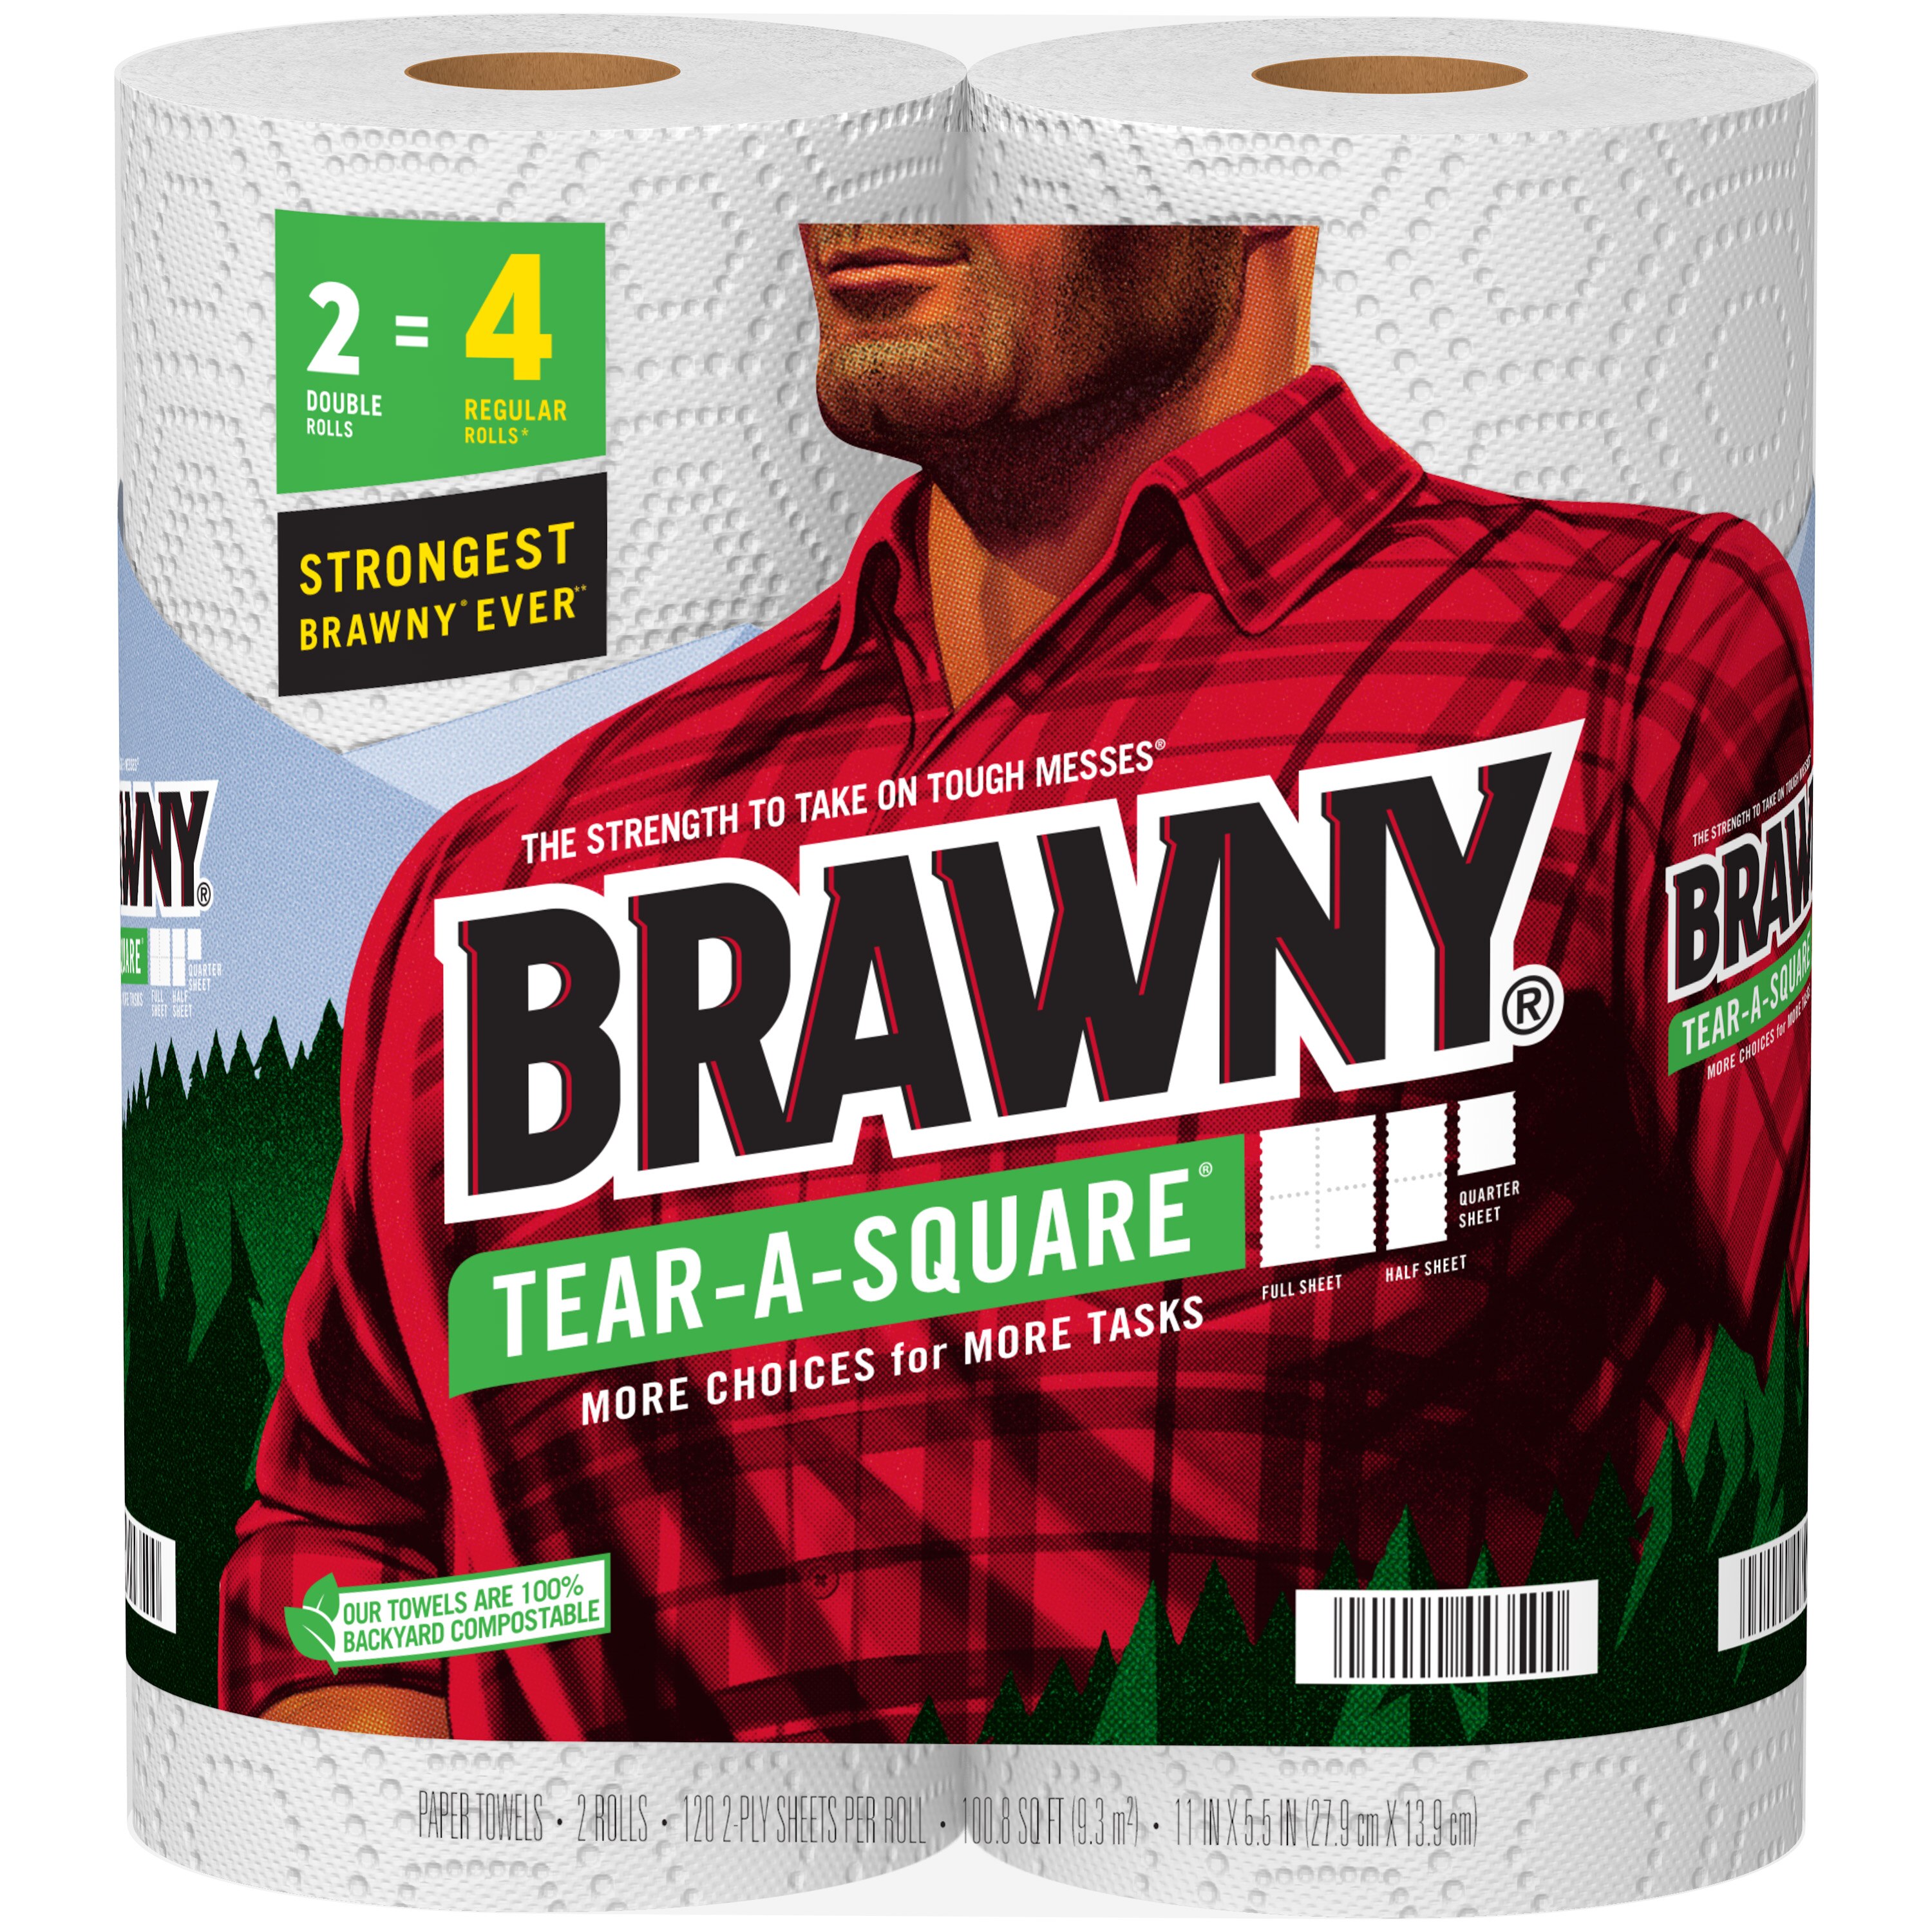 Brawny Tear-a-Square Paper Towels, 2 Double Rolls